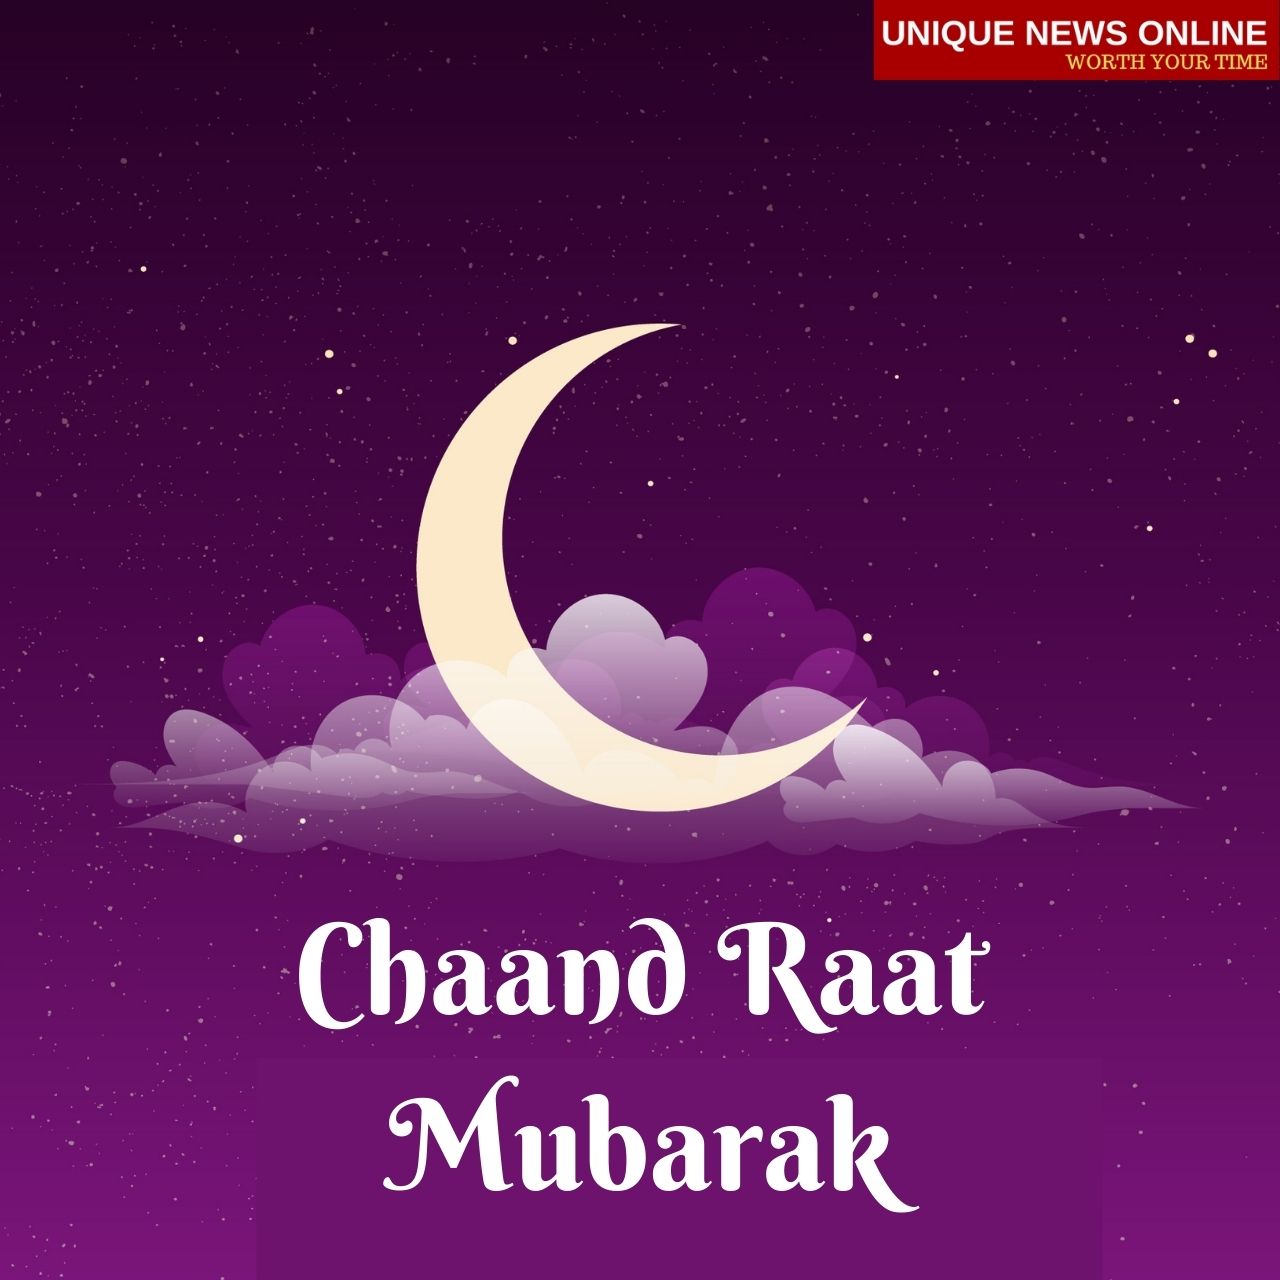 Chaand Raat Mubarak 2021 HD Images (pic), Status, Quotes, Greetings, Messages, GIF, and WhatsApp Status video download to Share